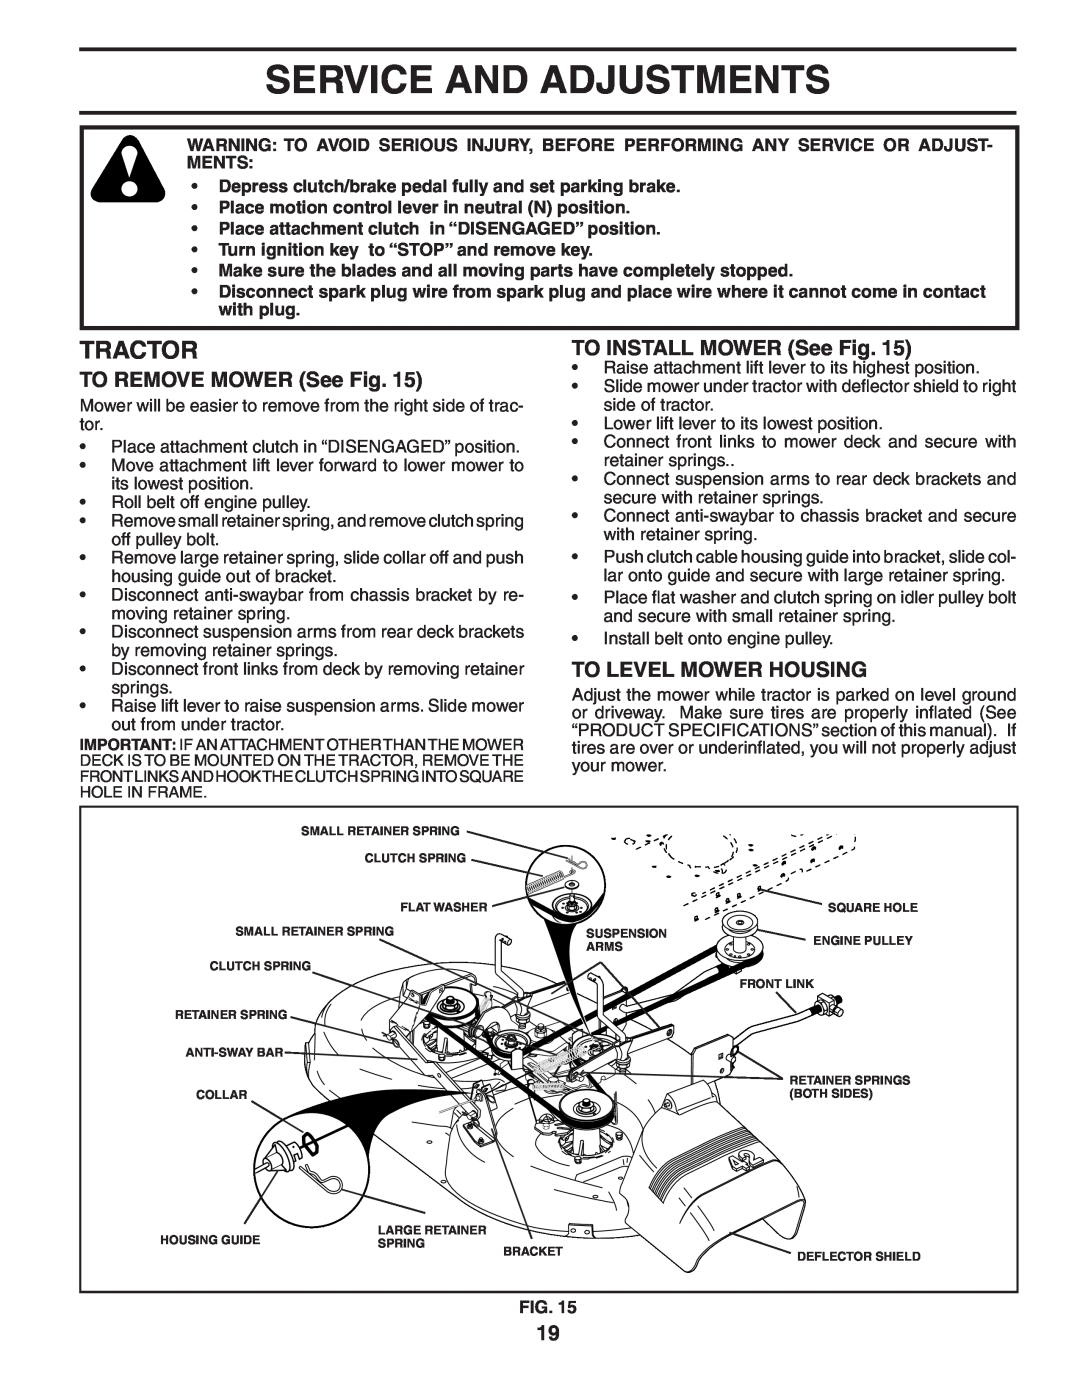 Poulan 402559 Service And Adjustments, TO REMOVE MOWER See Fig, TO INSTALL MOWER See Fig, To Level Mower Housing, Tractor 